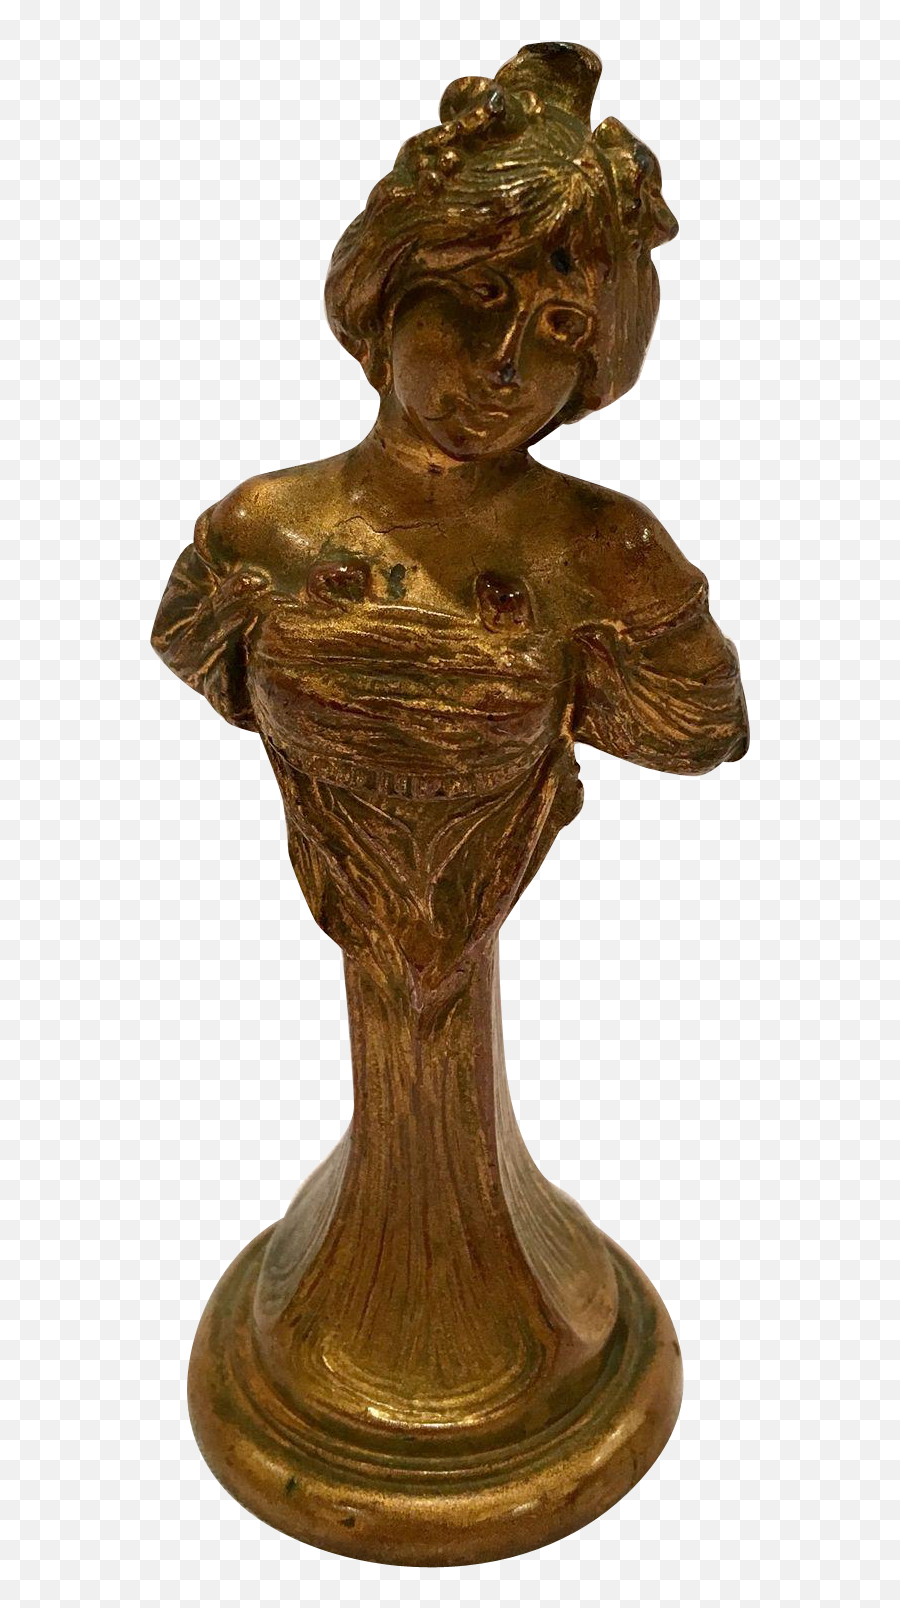 Antique Bronze Bust Of A Woman By - Artifact Emoji,Small Statues That Describe Emotions